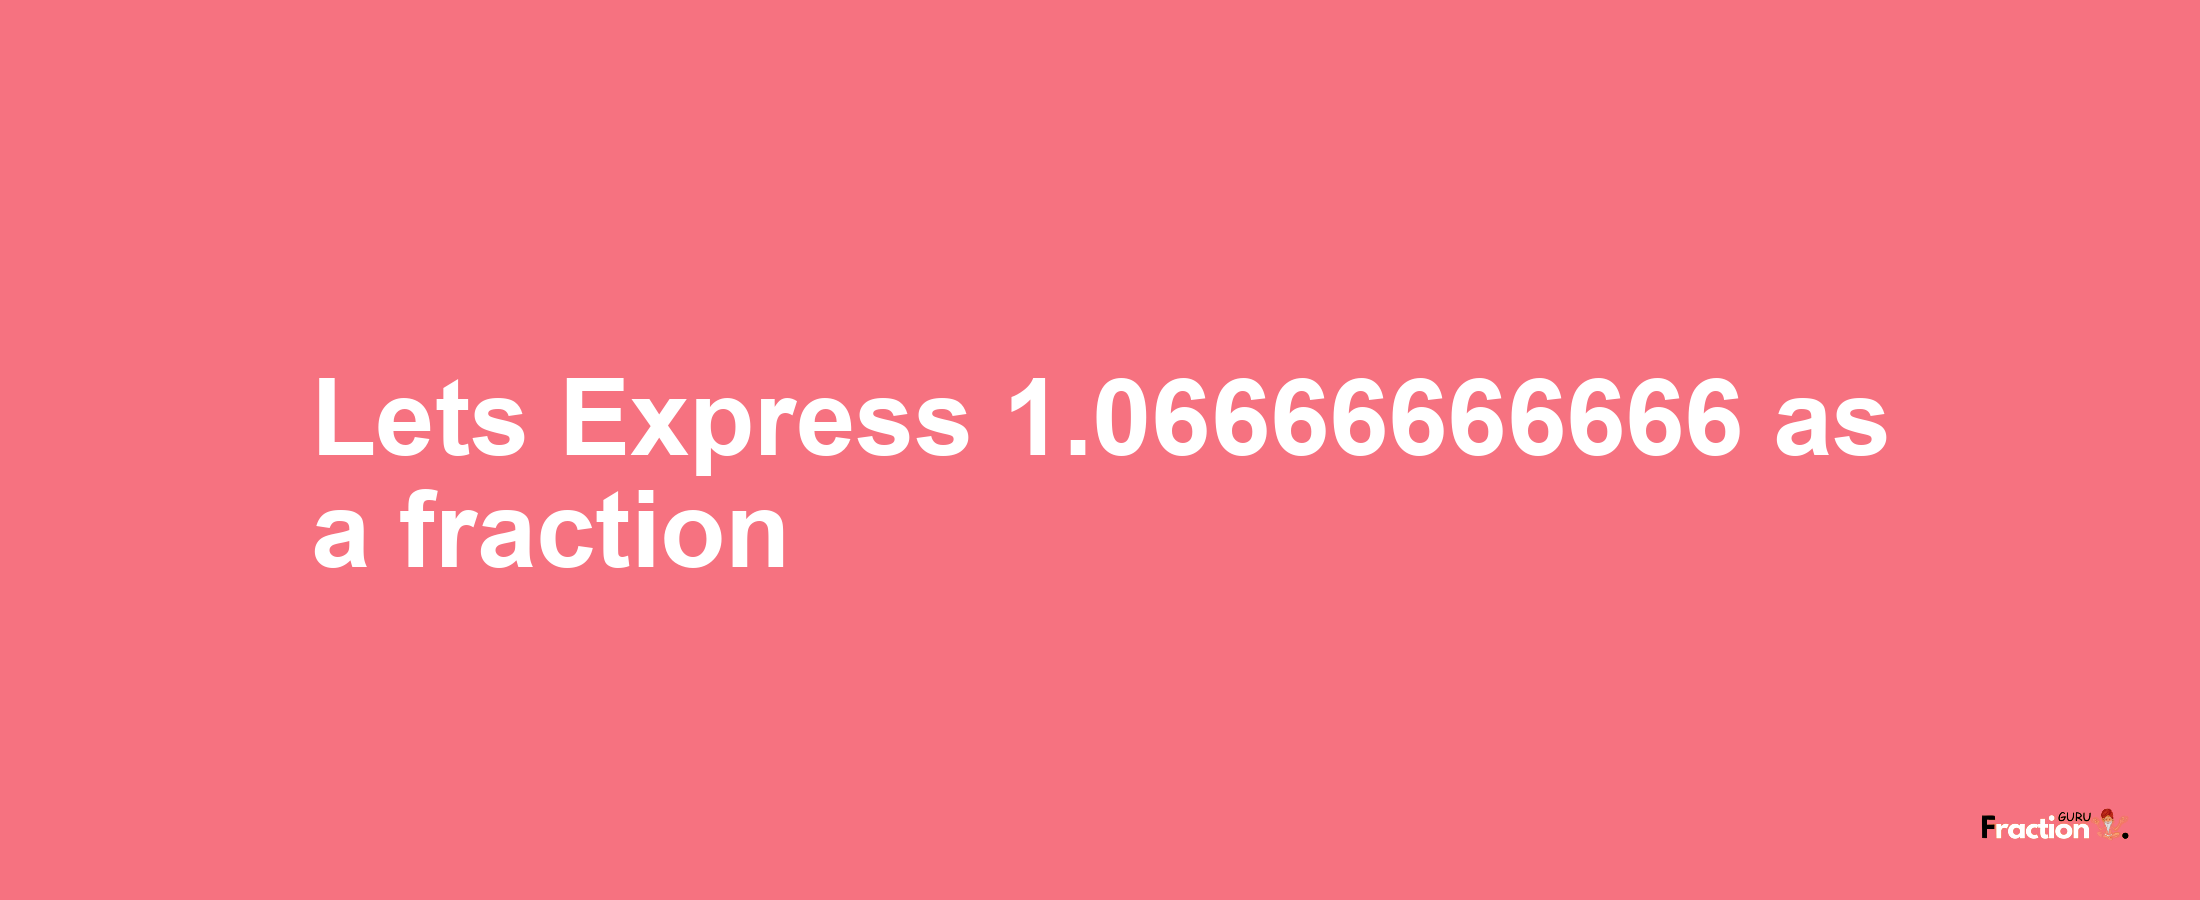 Lets Express 1.06666666666 as afraction